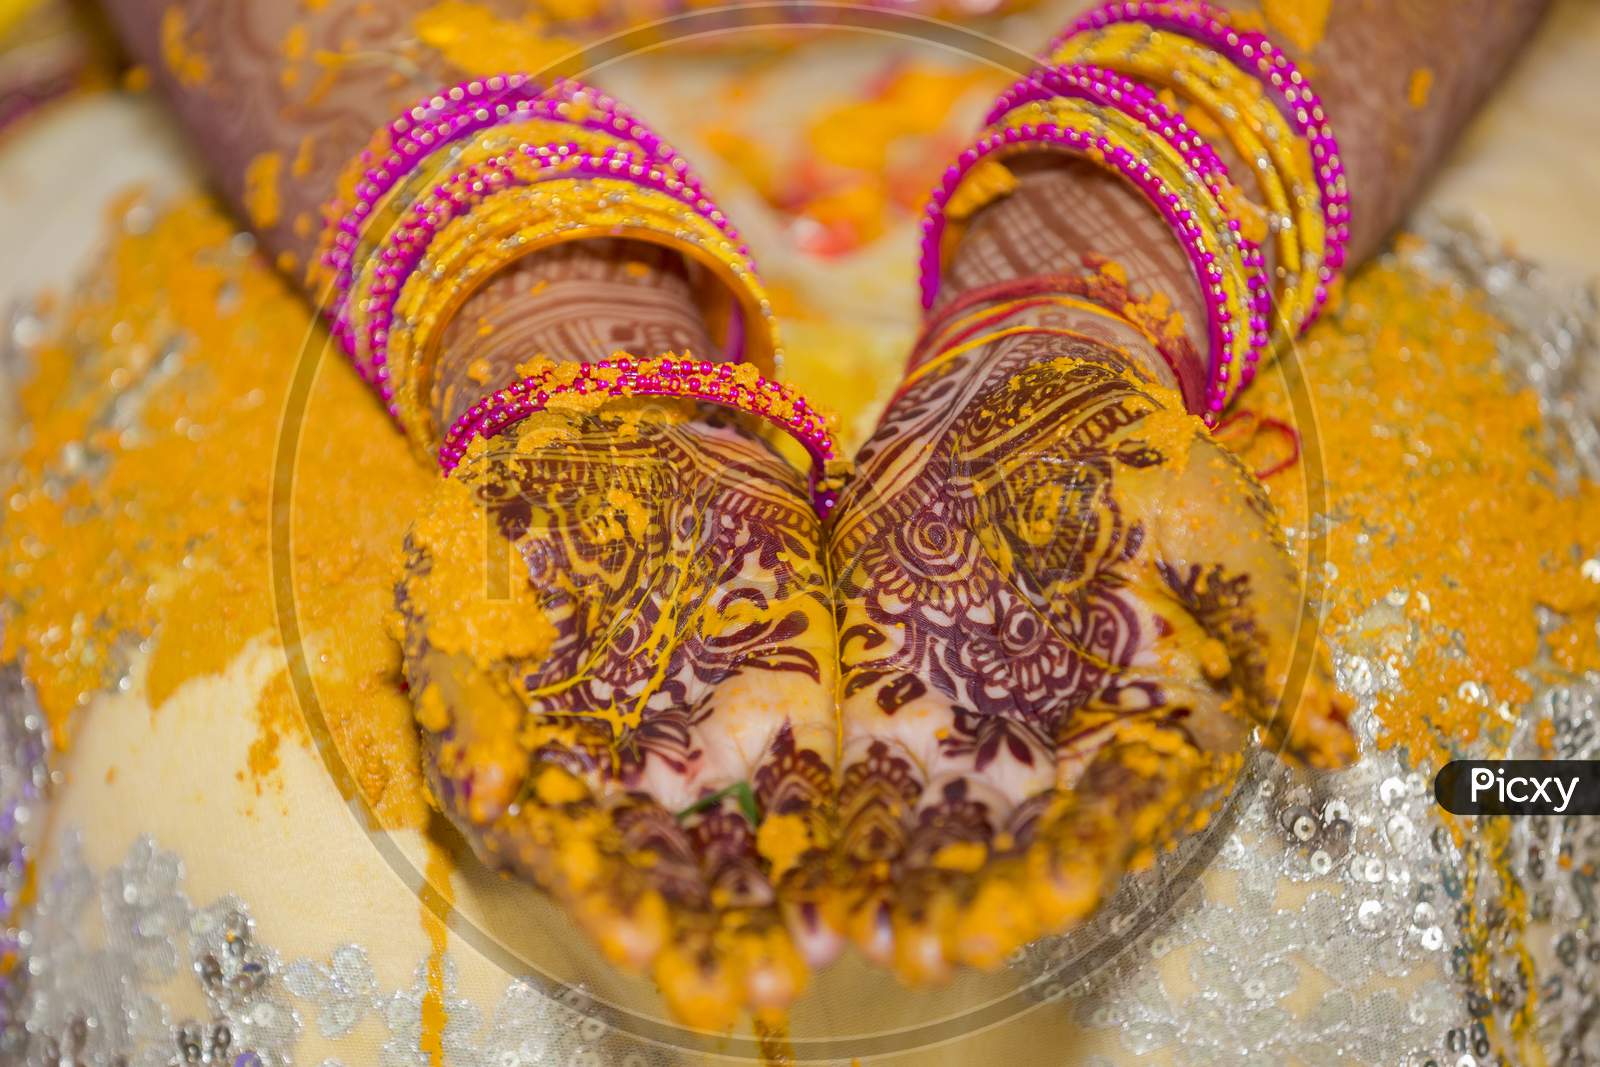 bride's hand painted with fresh turmeric paste.